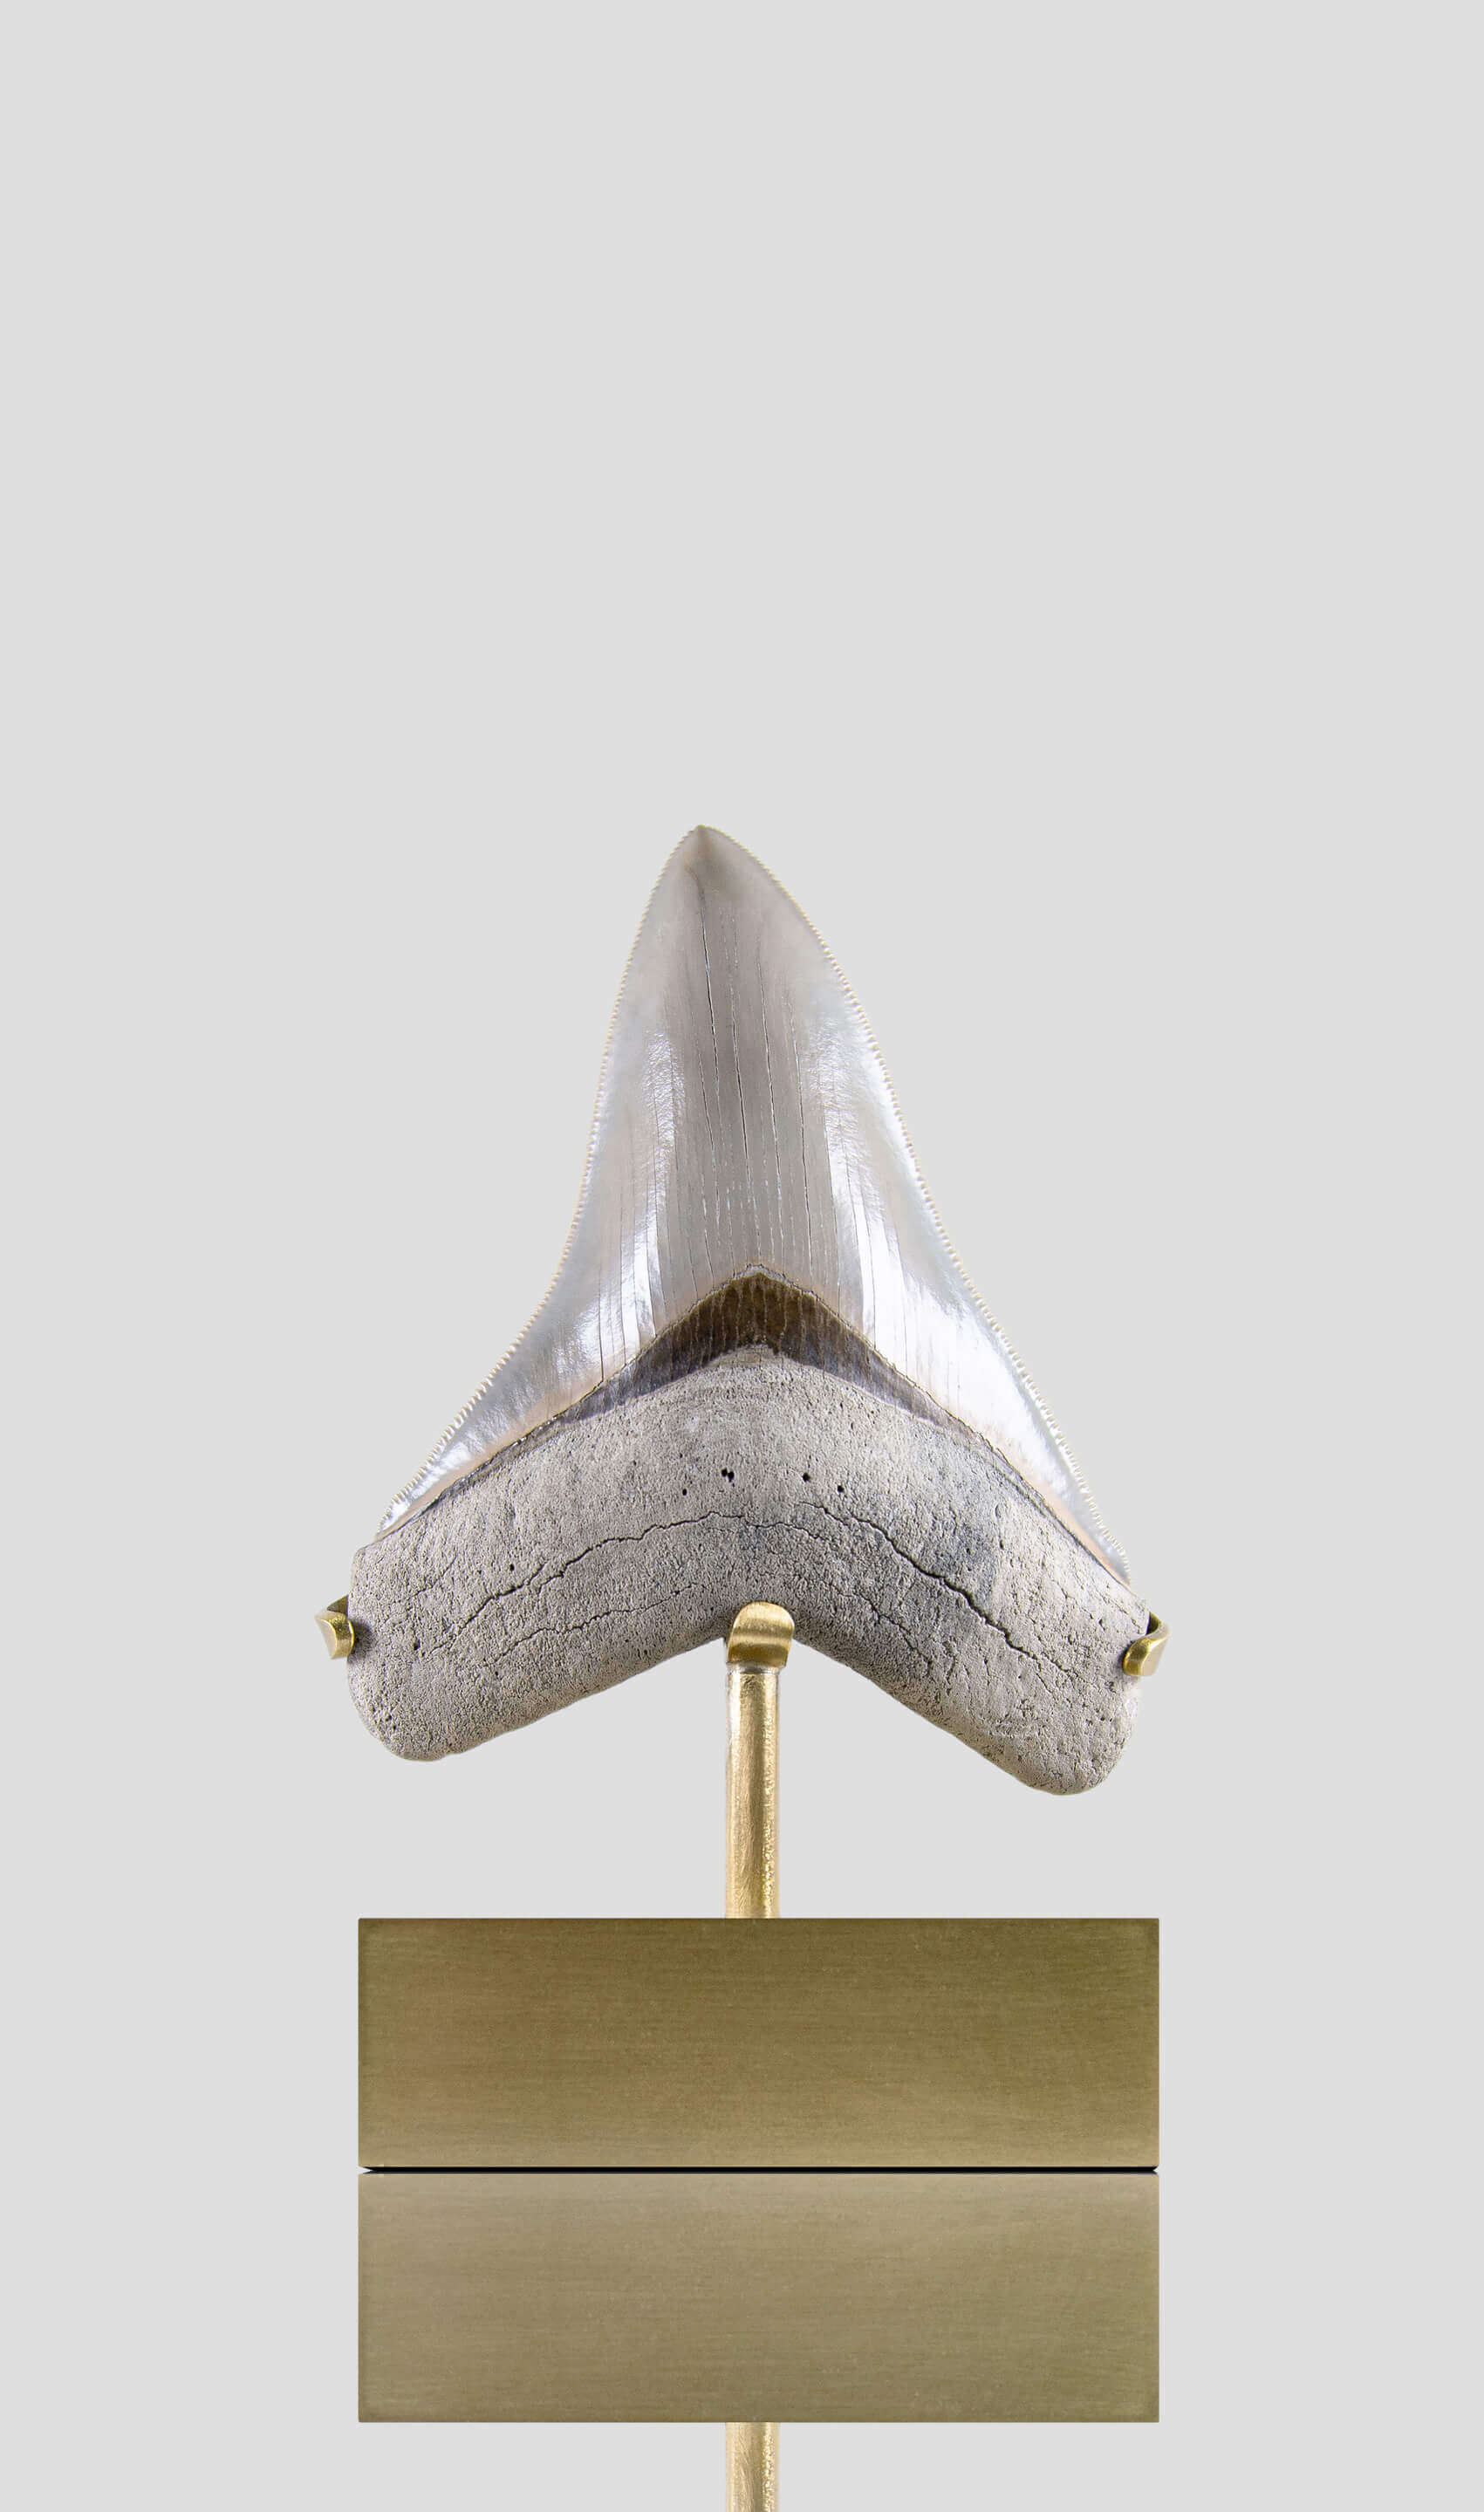 Fossil Megalodon Carcharodon Tooth 4.4"